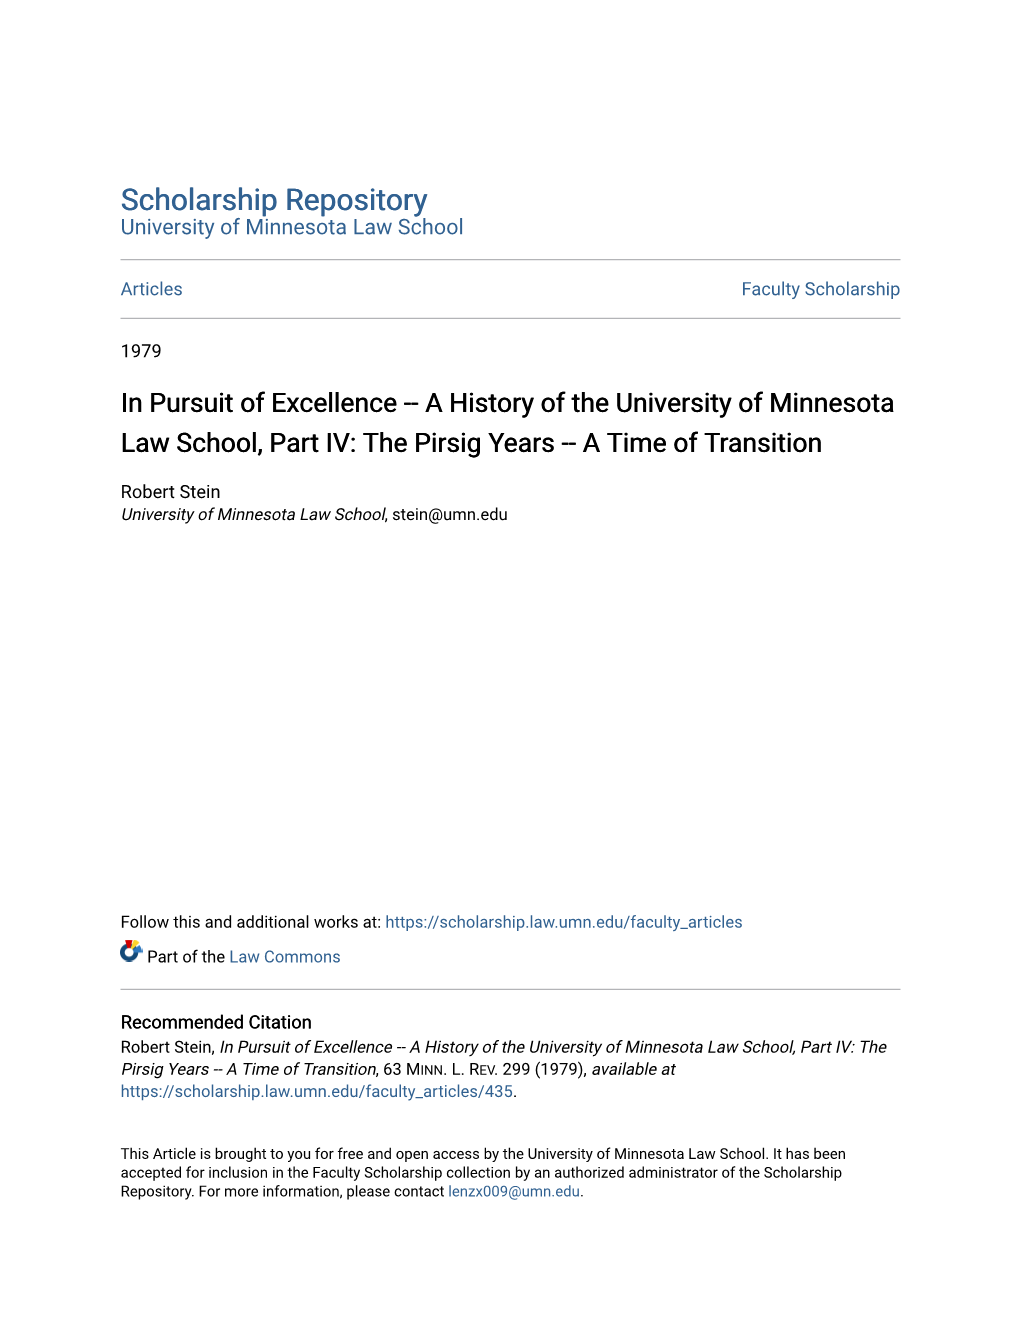 A History of the University of Minnesota Law School, Part IV: the Pirsig Years -- a Time of Transition